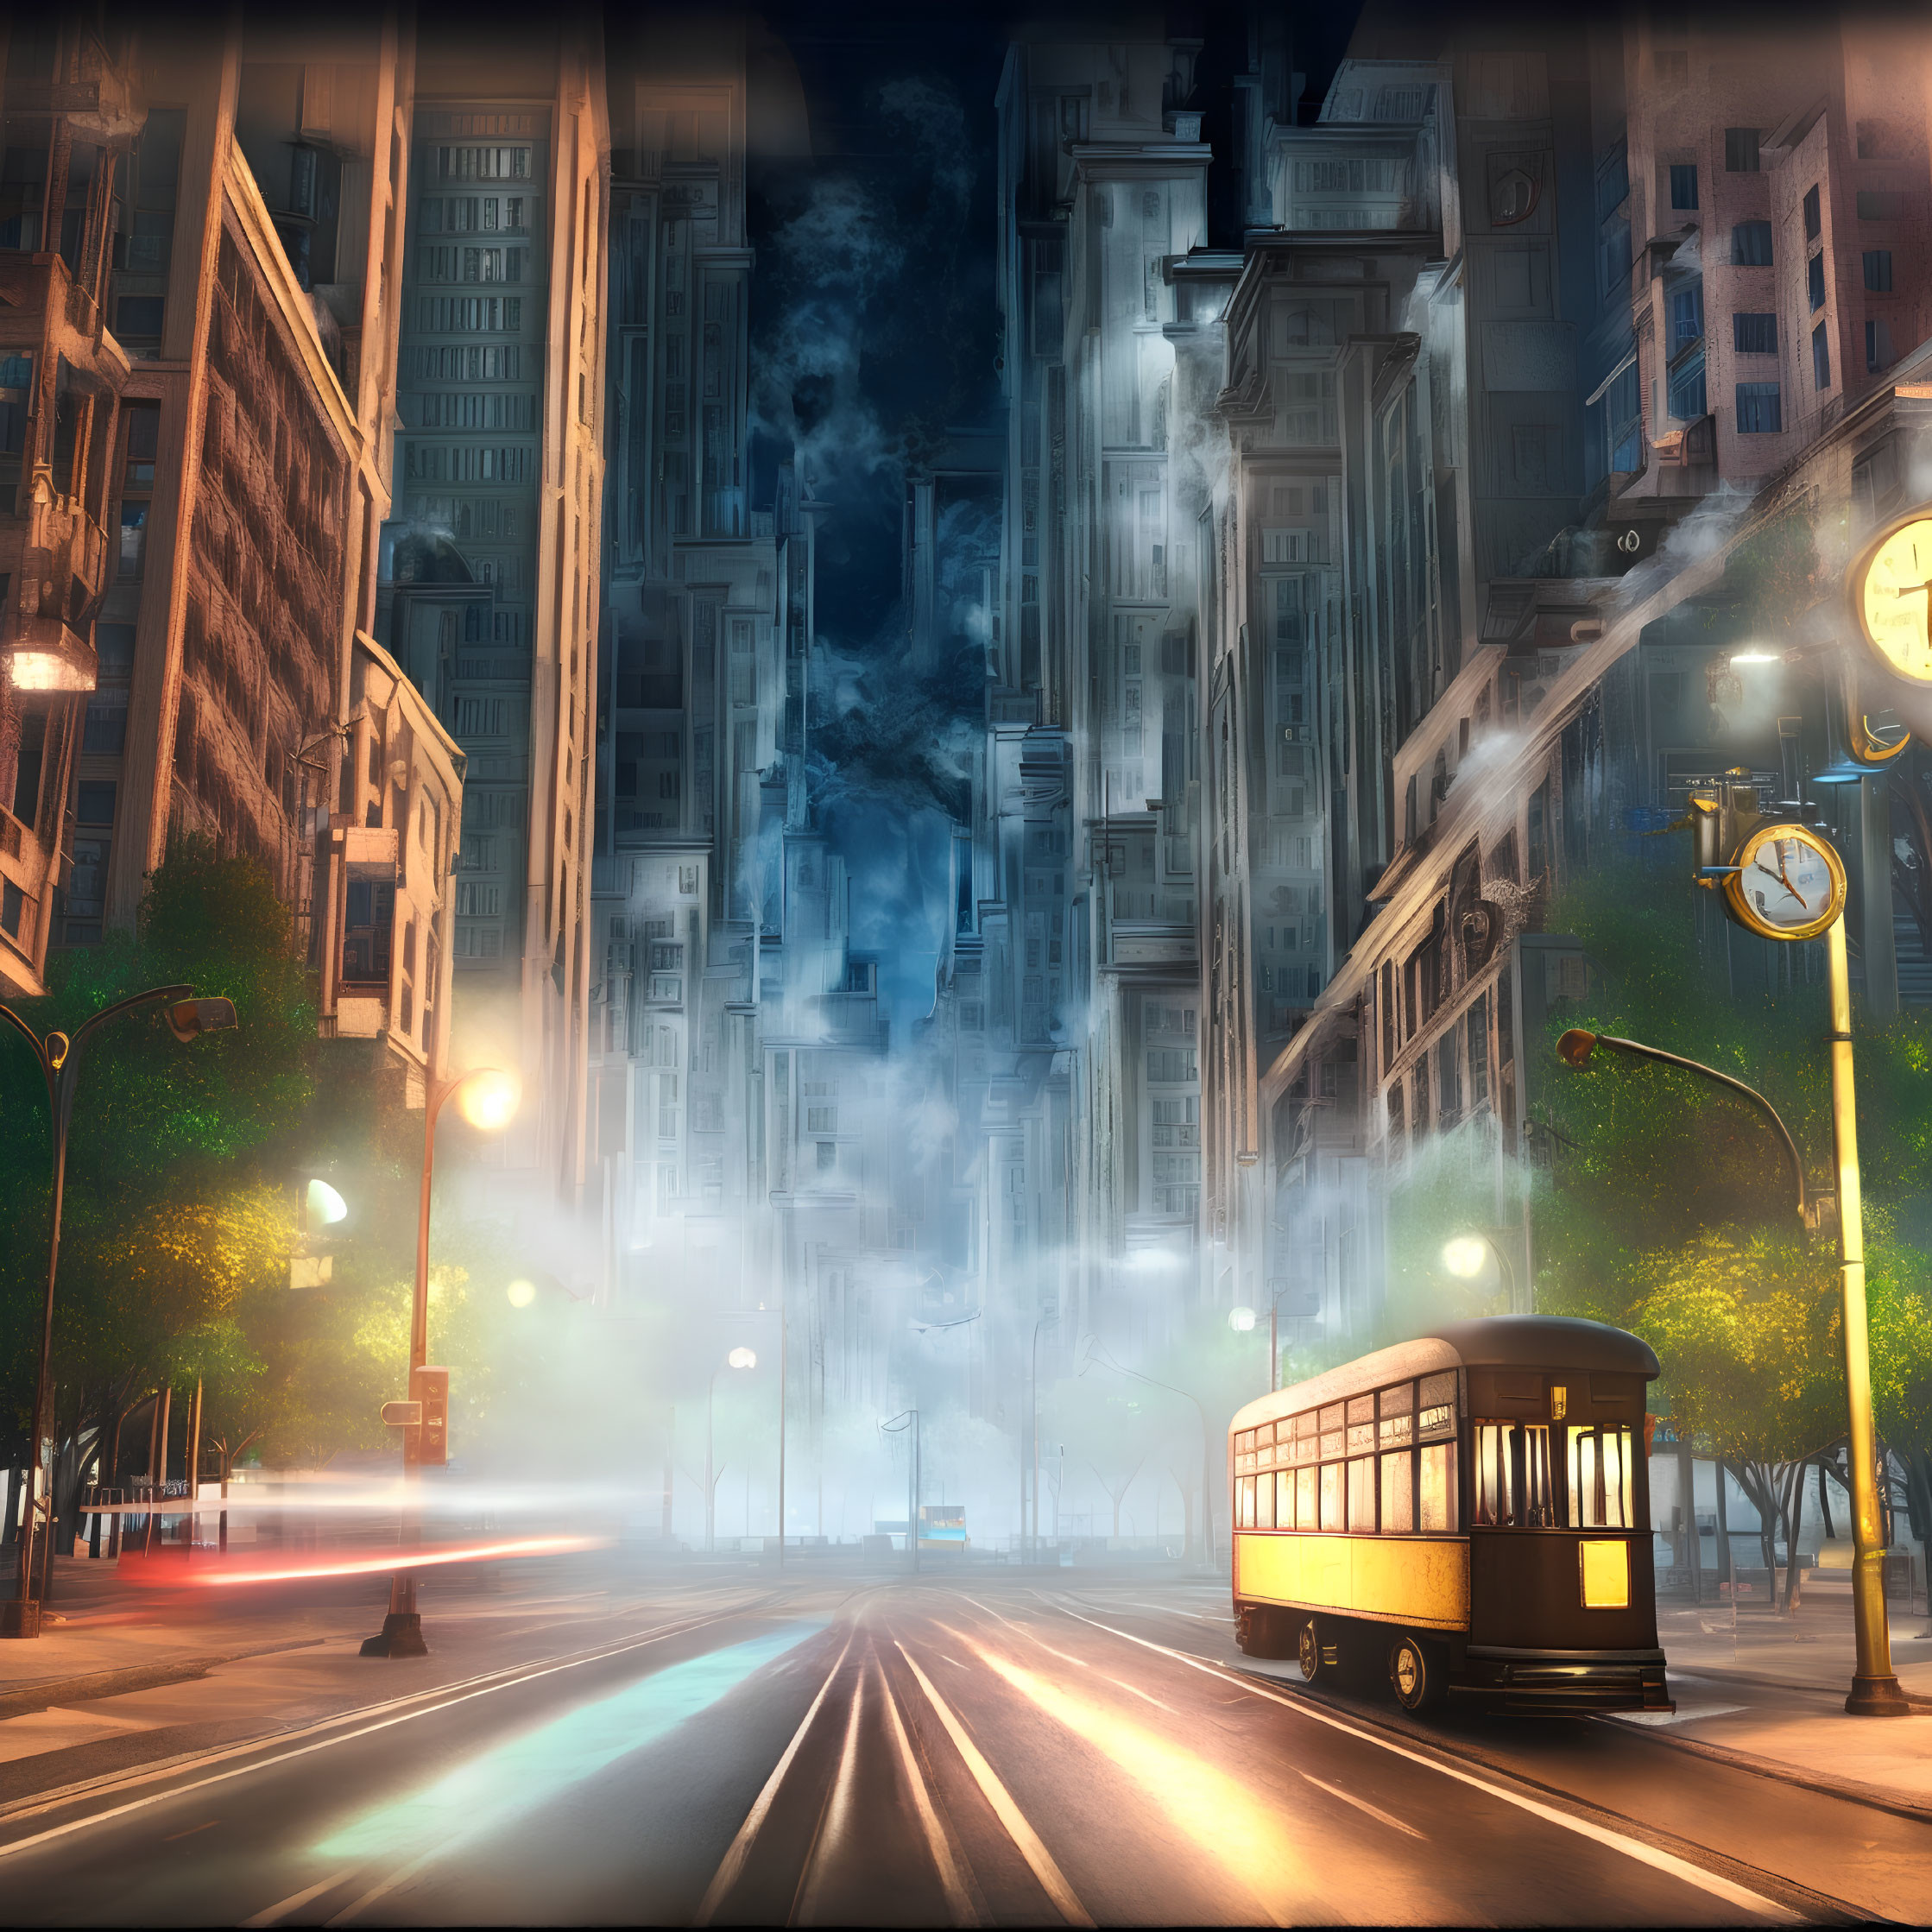 Dreamlike Cityscape with Towering Buildings and Classic Tram